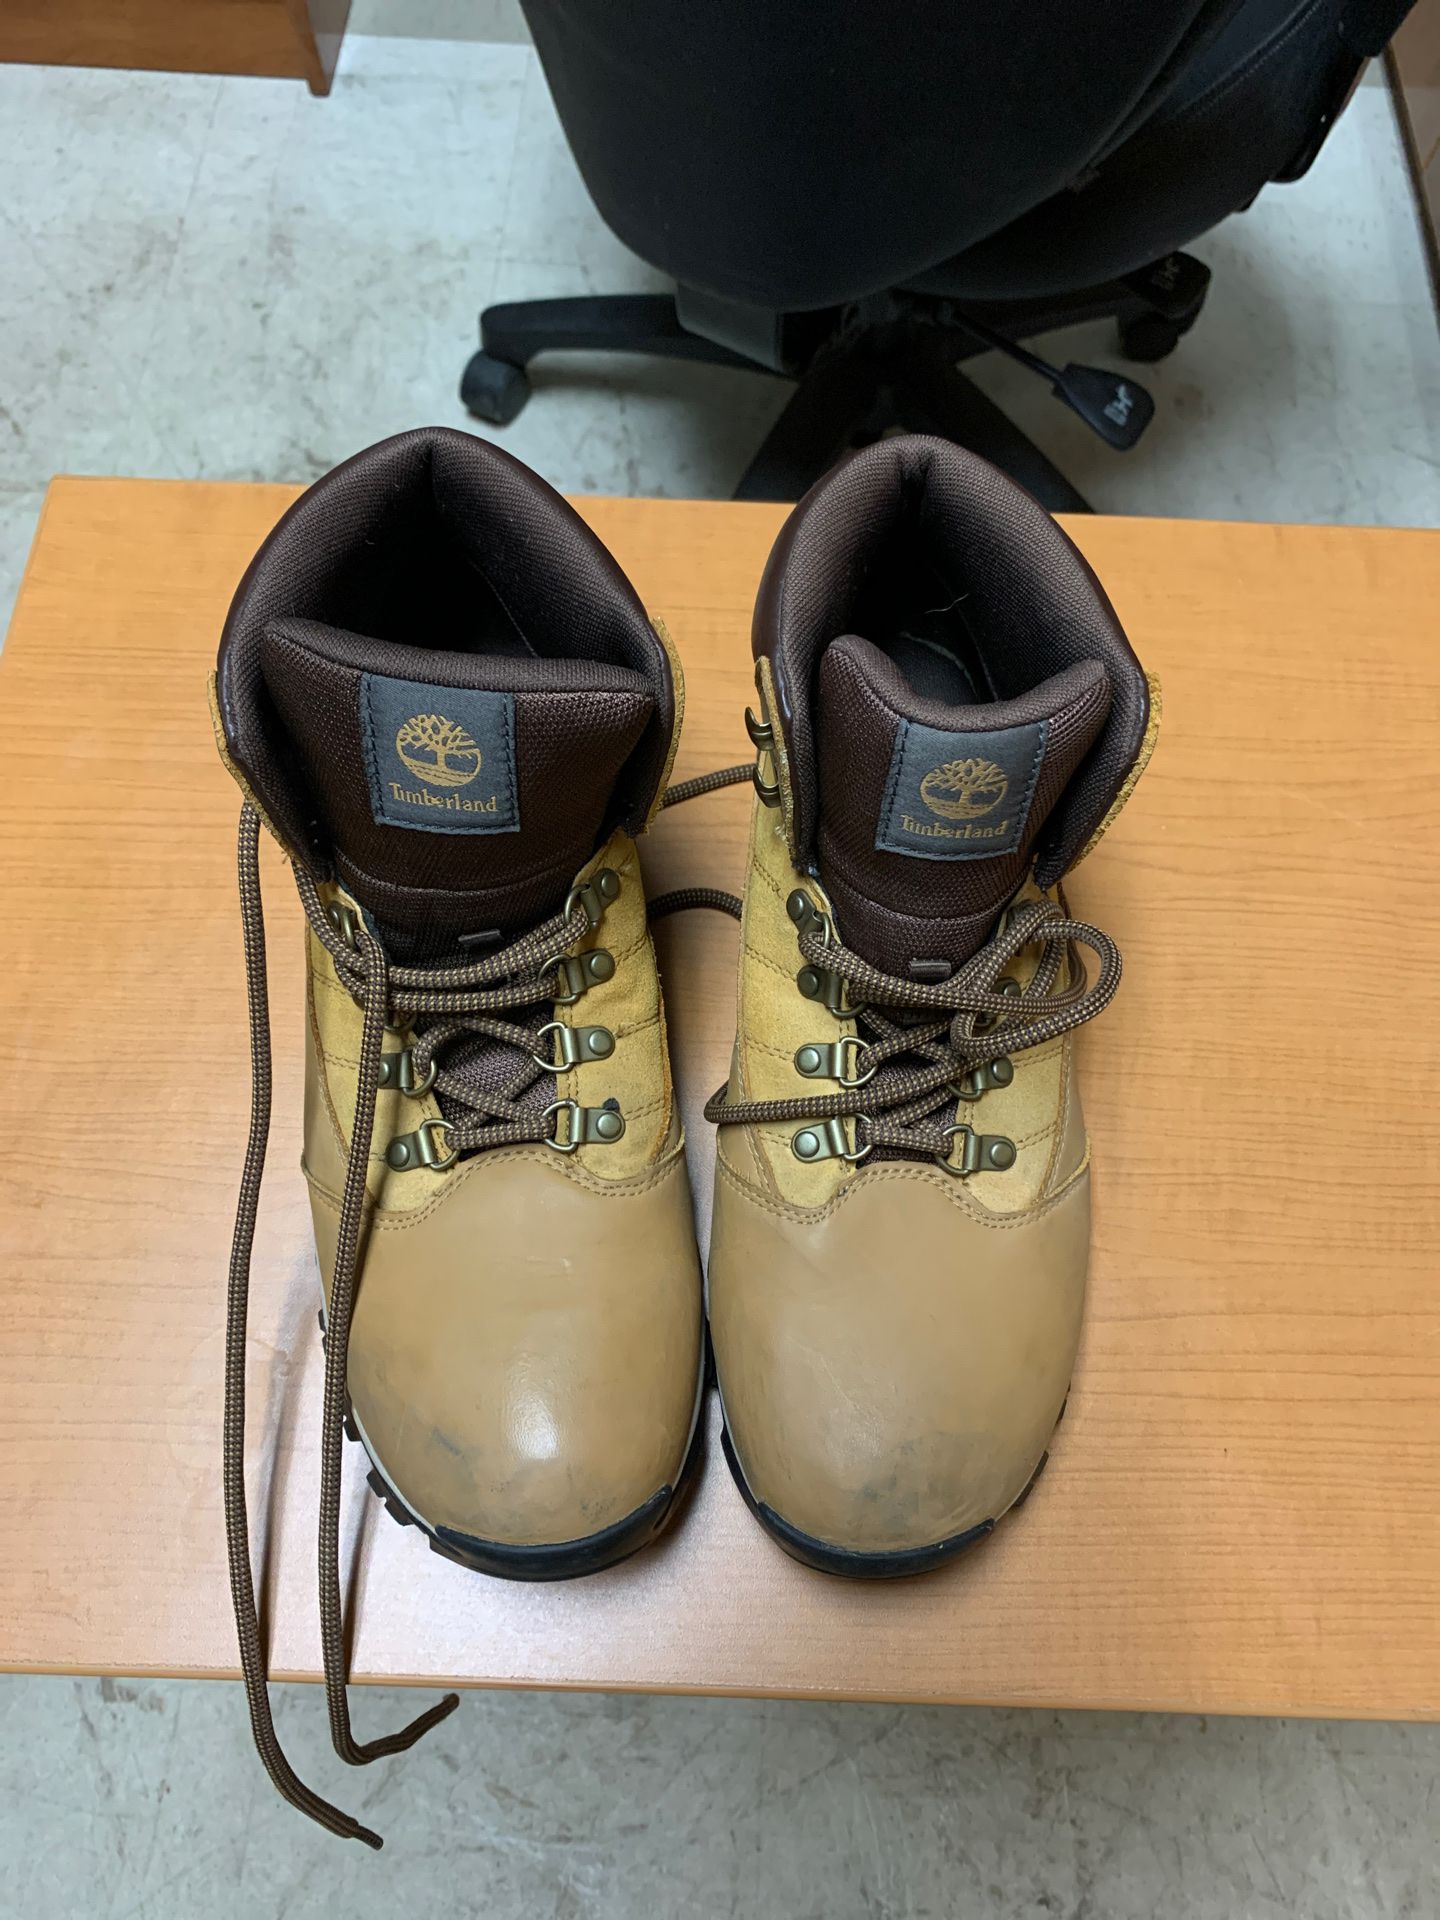 Timberland hiking boots, size ten